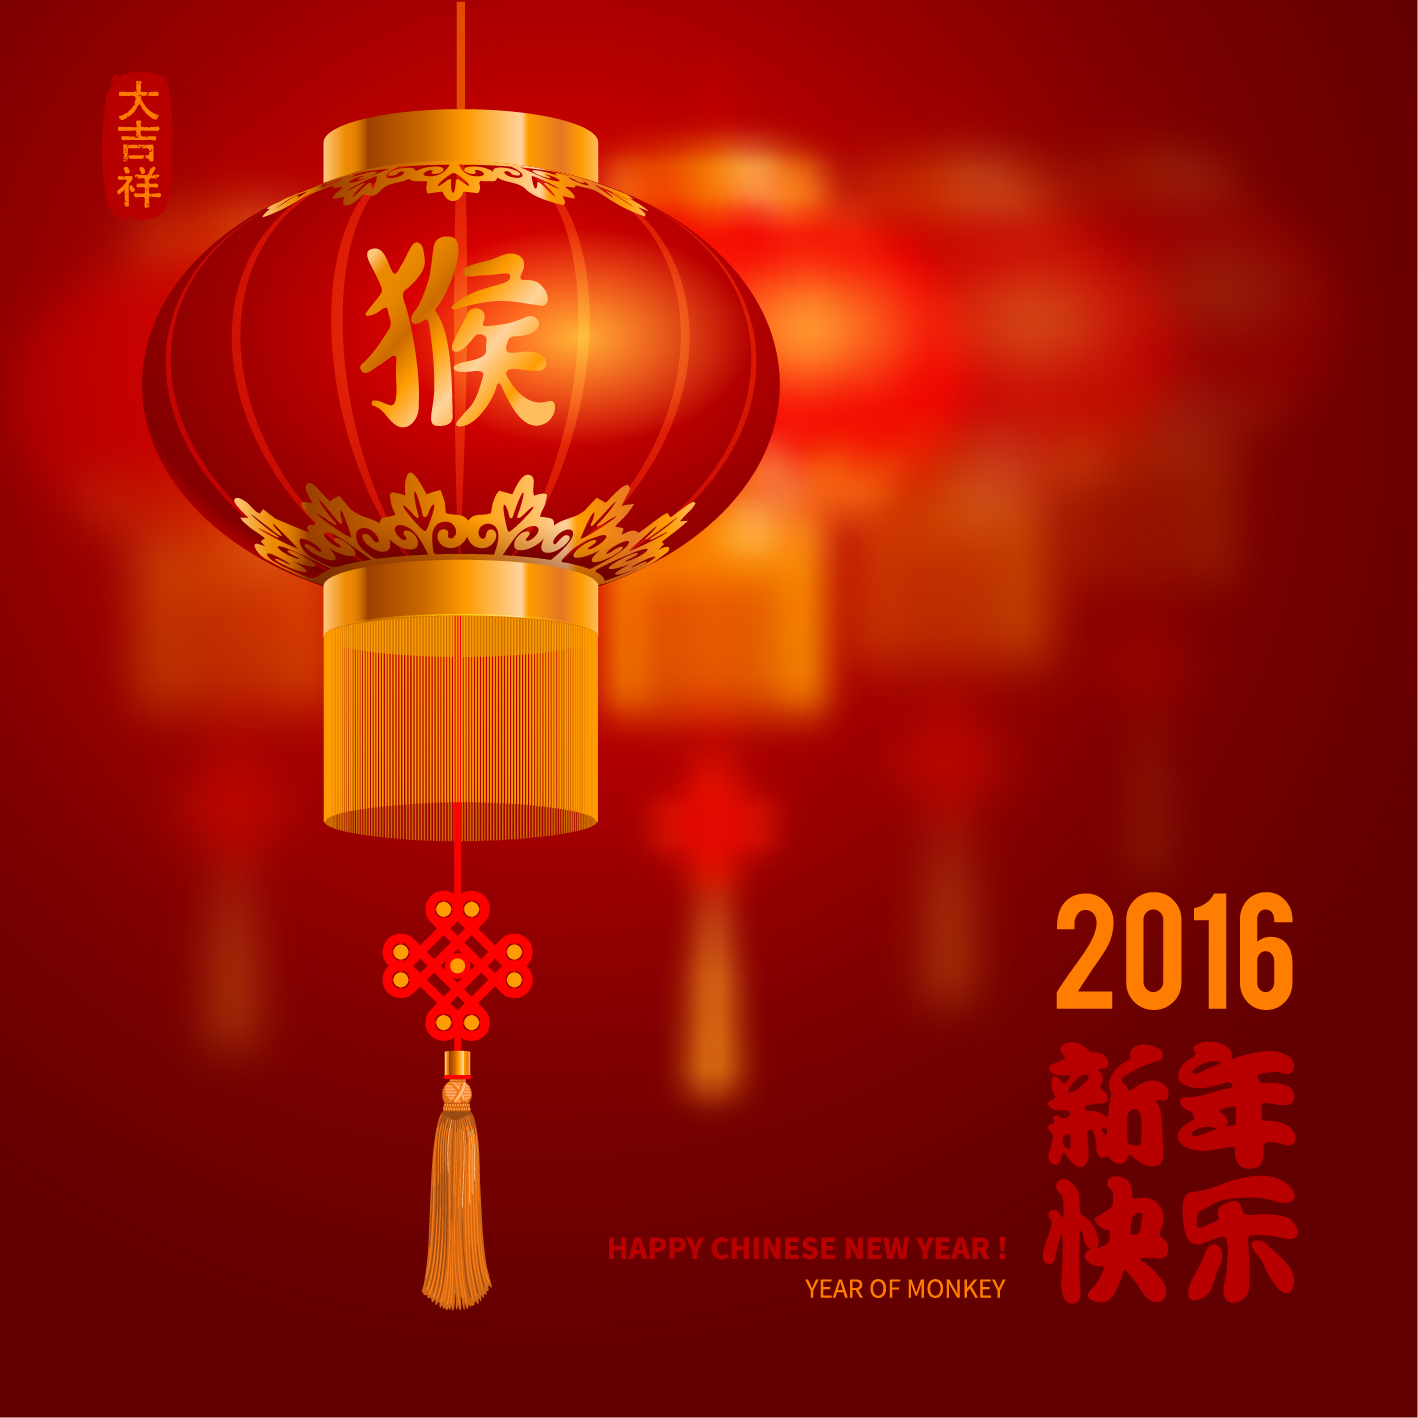 Chinese new year background with red lantern vector 03 year new lantern chinese background   